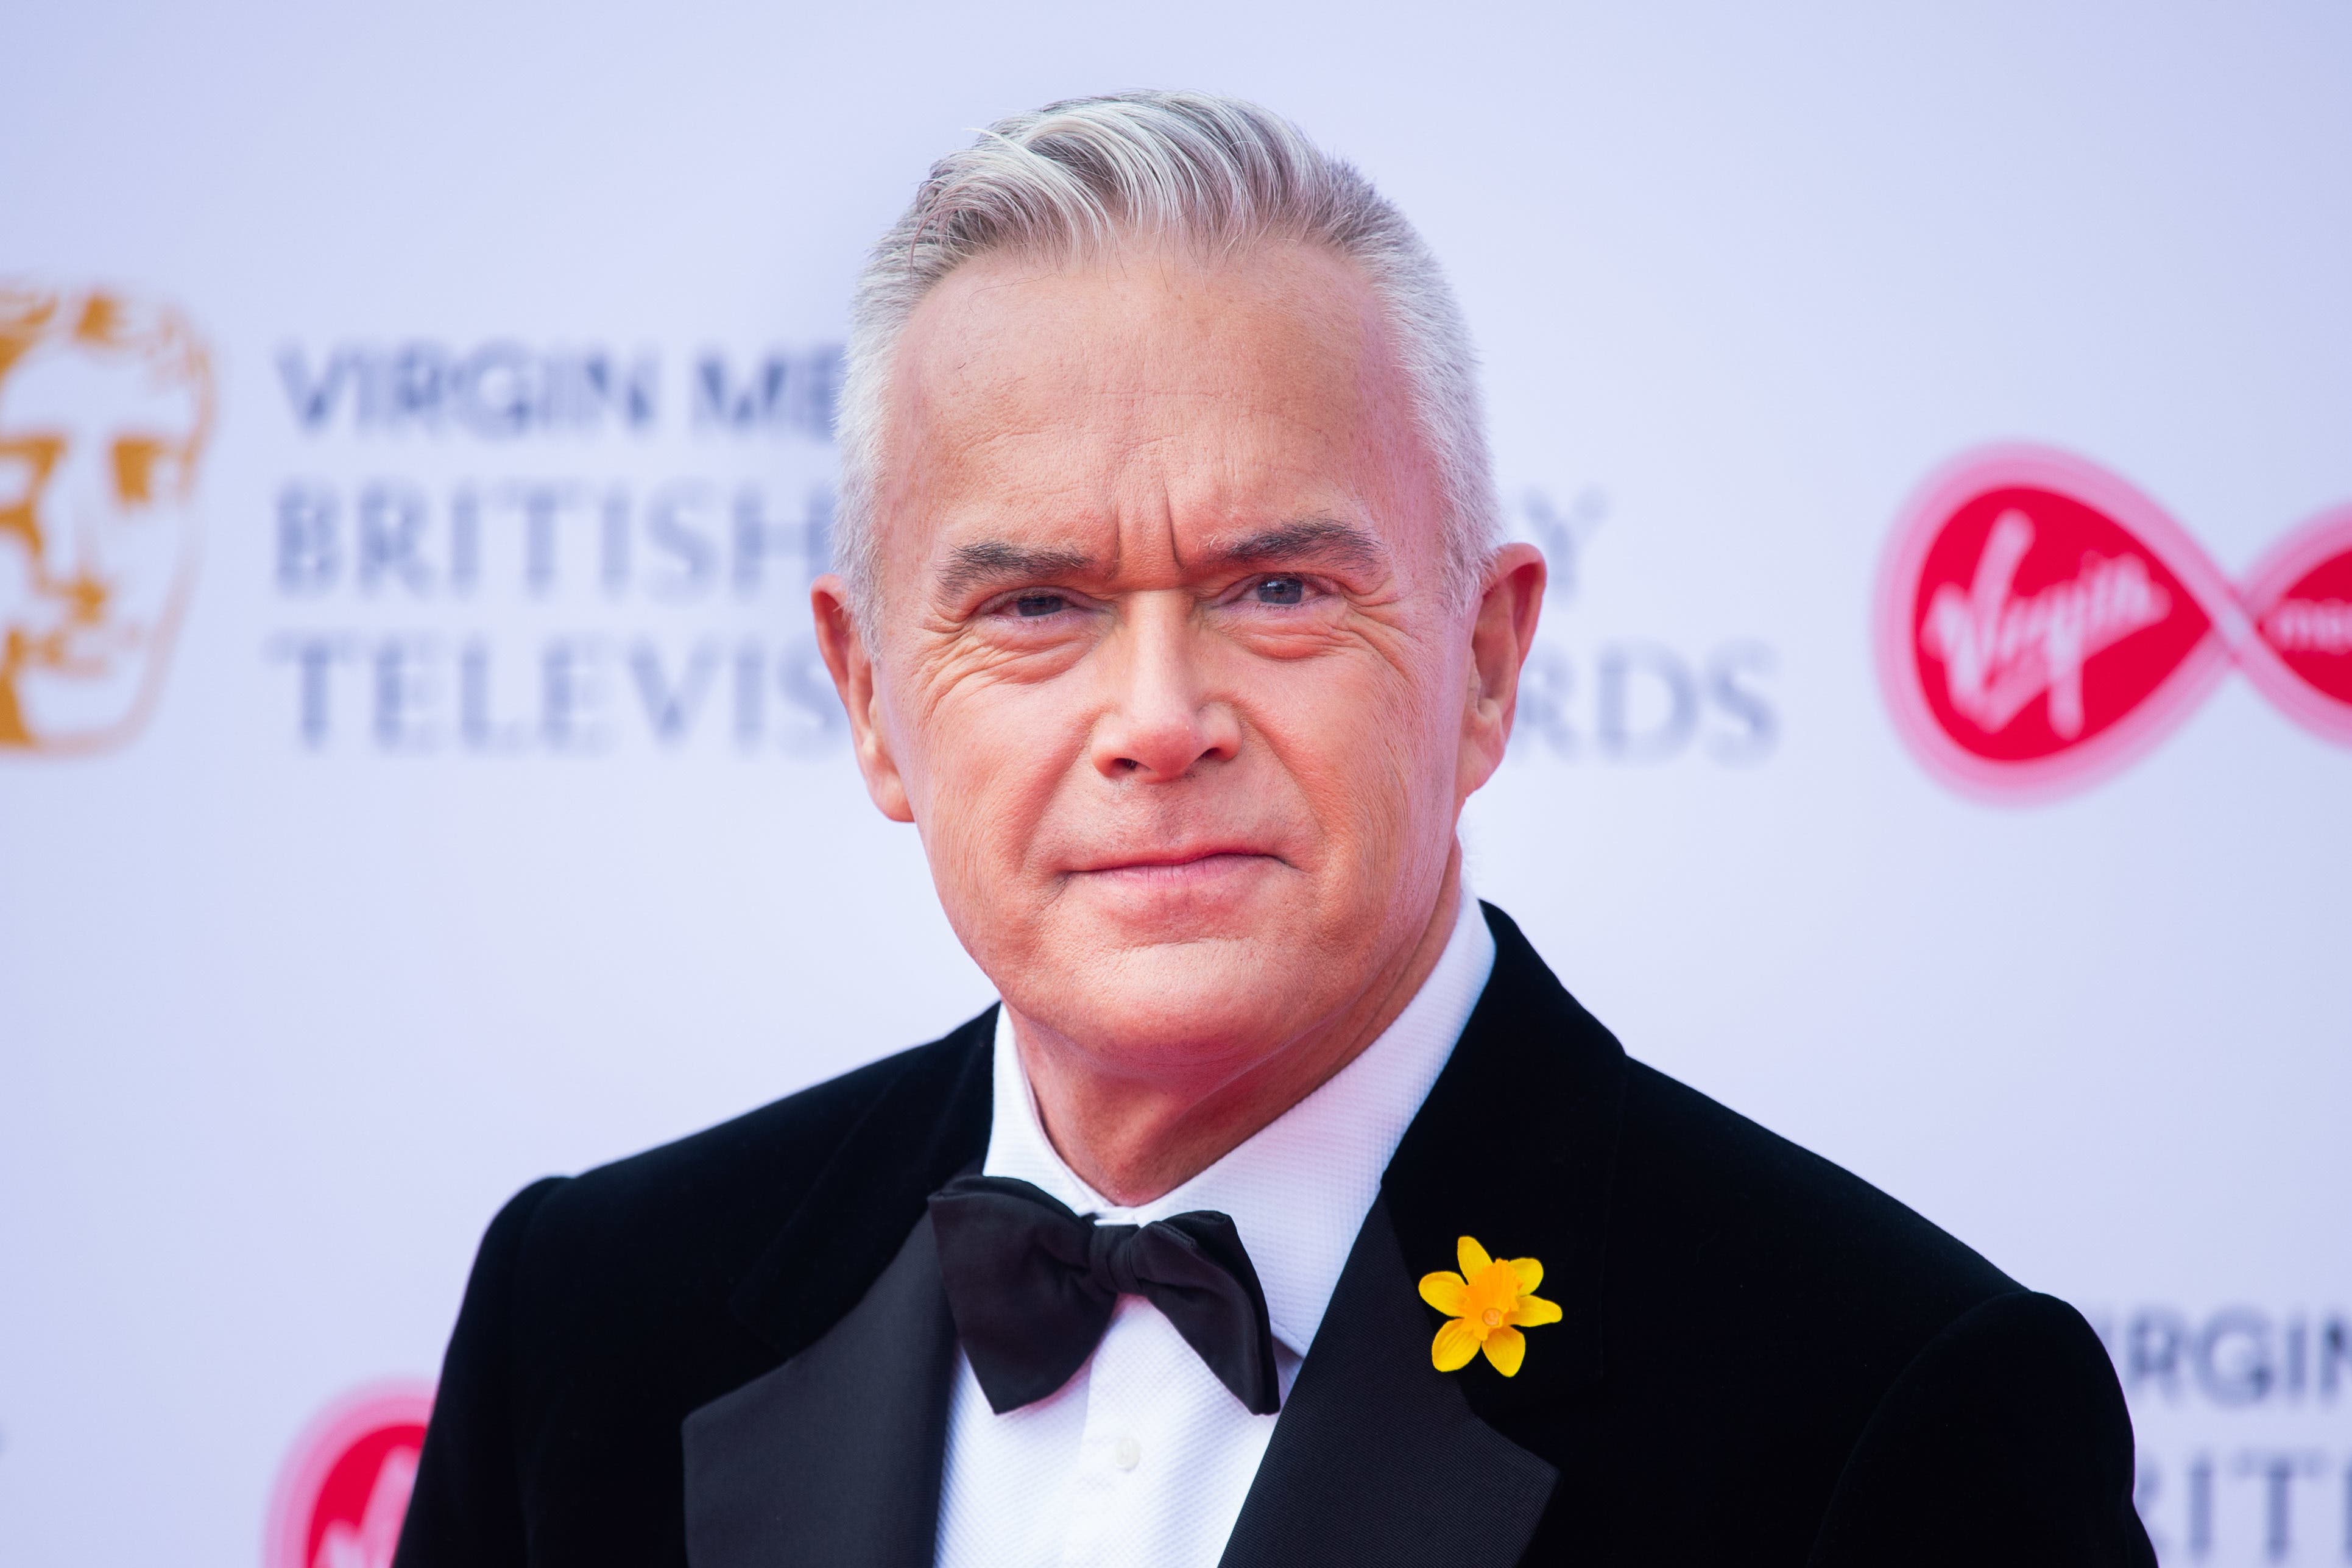 Huw Edwards accused of sending BBC staff inappropriate messages as broadcaster resumes investigation The Independent image pic